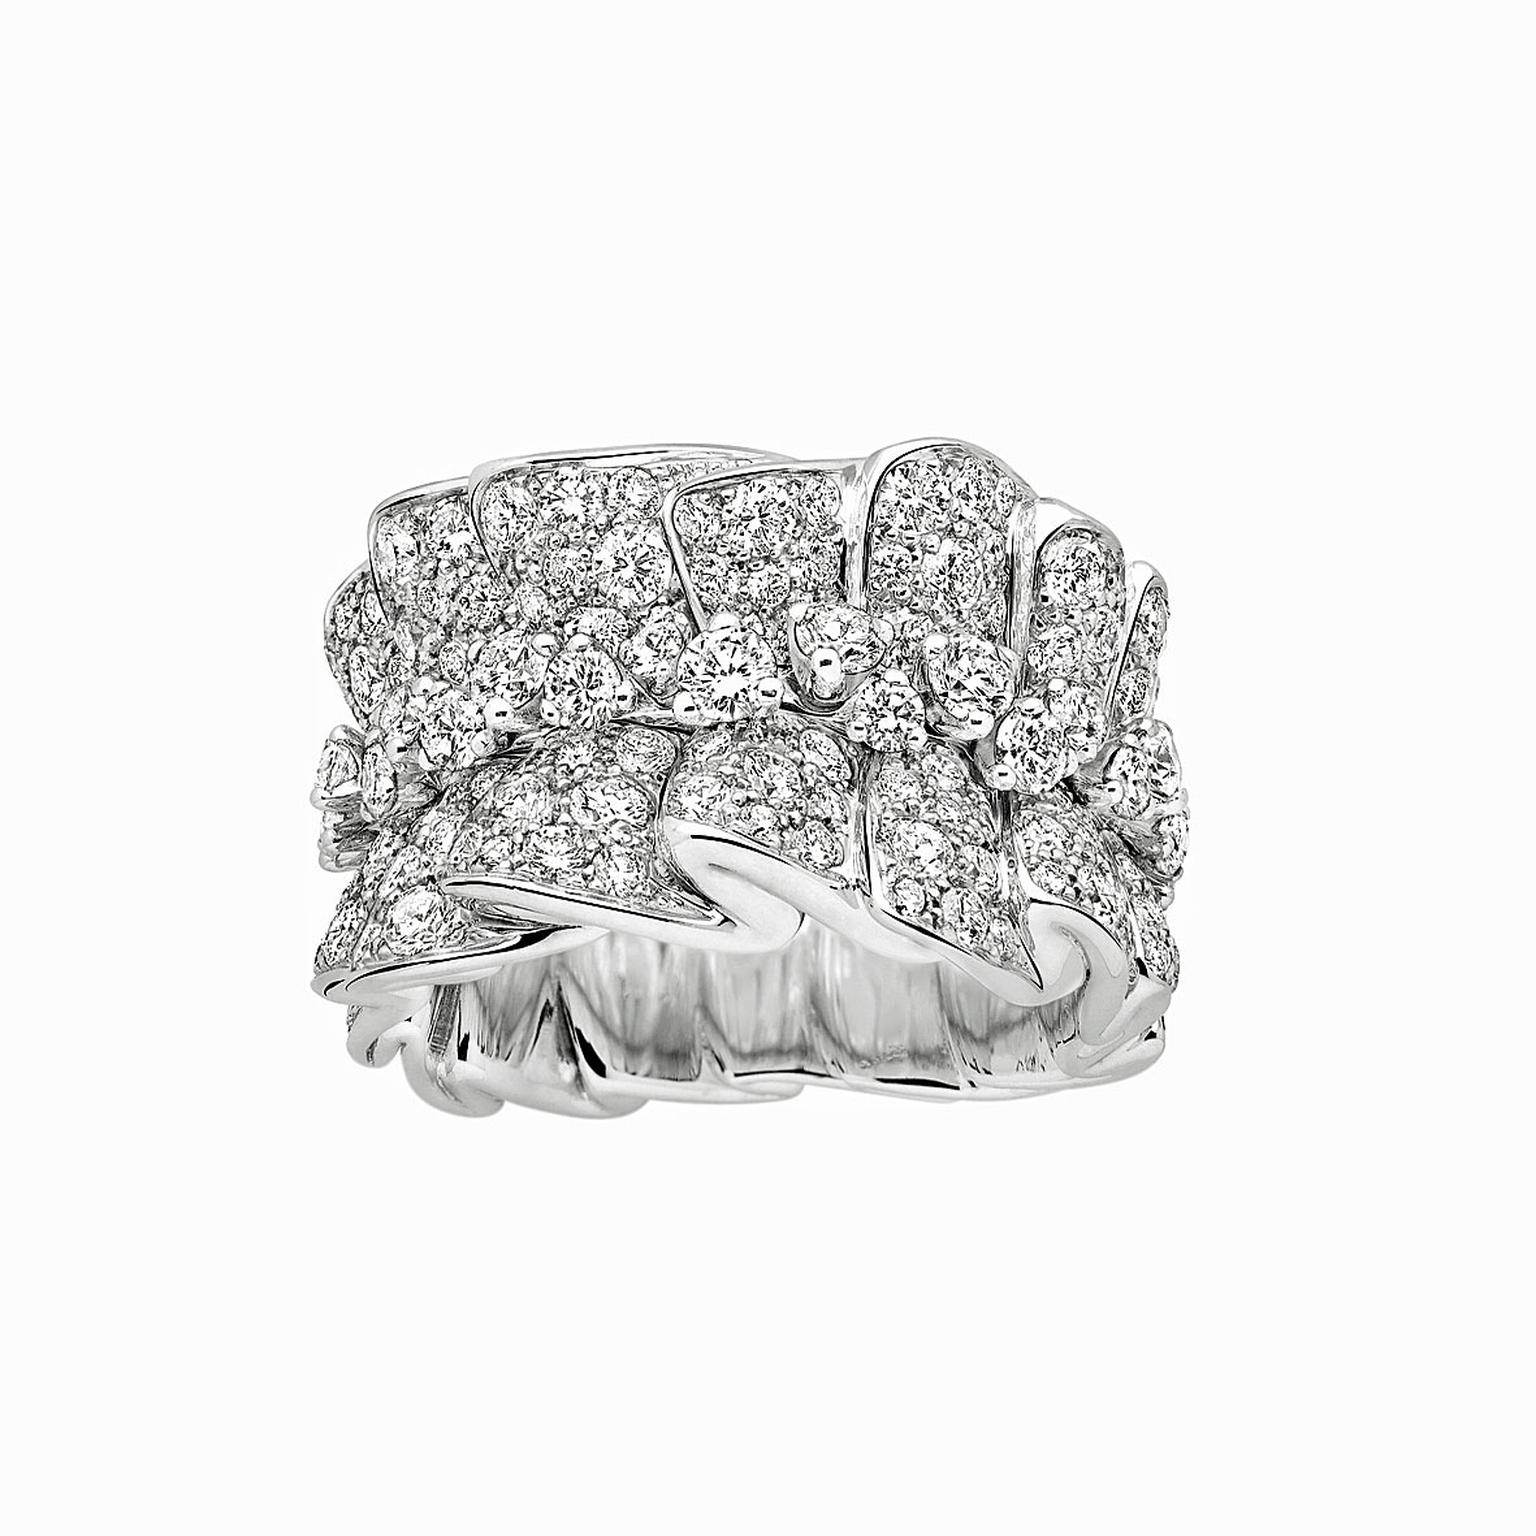 Archi Dior Bar en Corolle Bague white gold and diamond ring